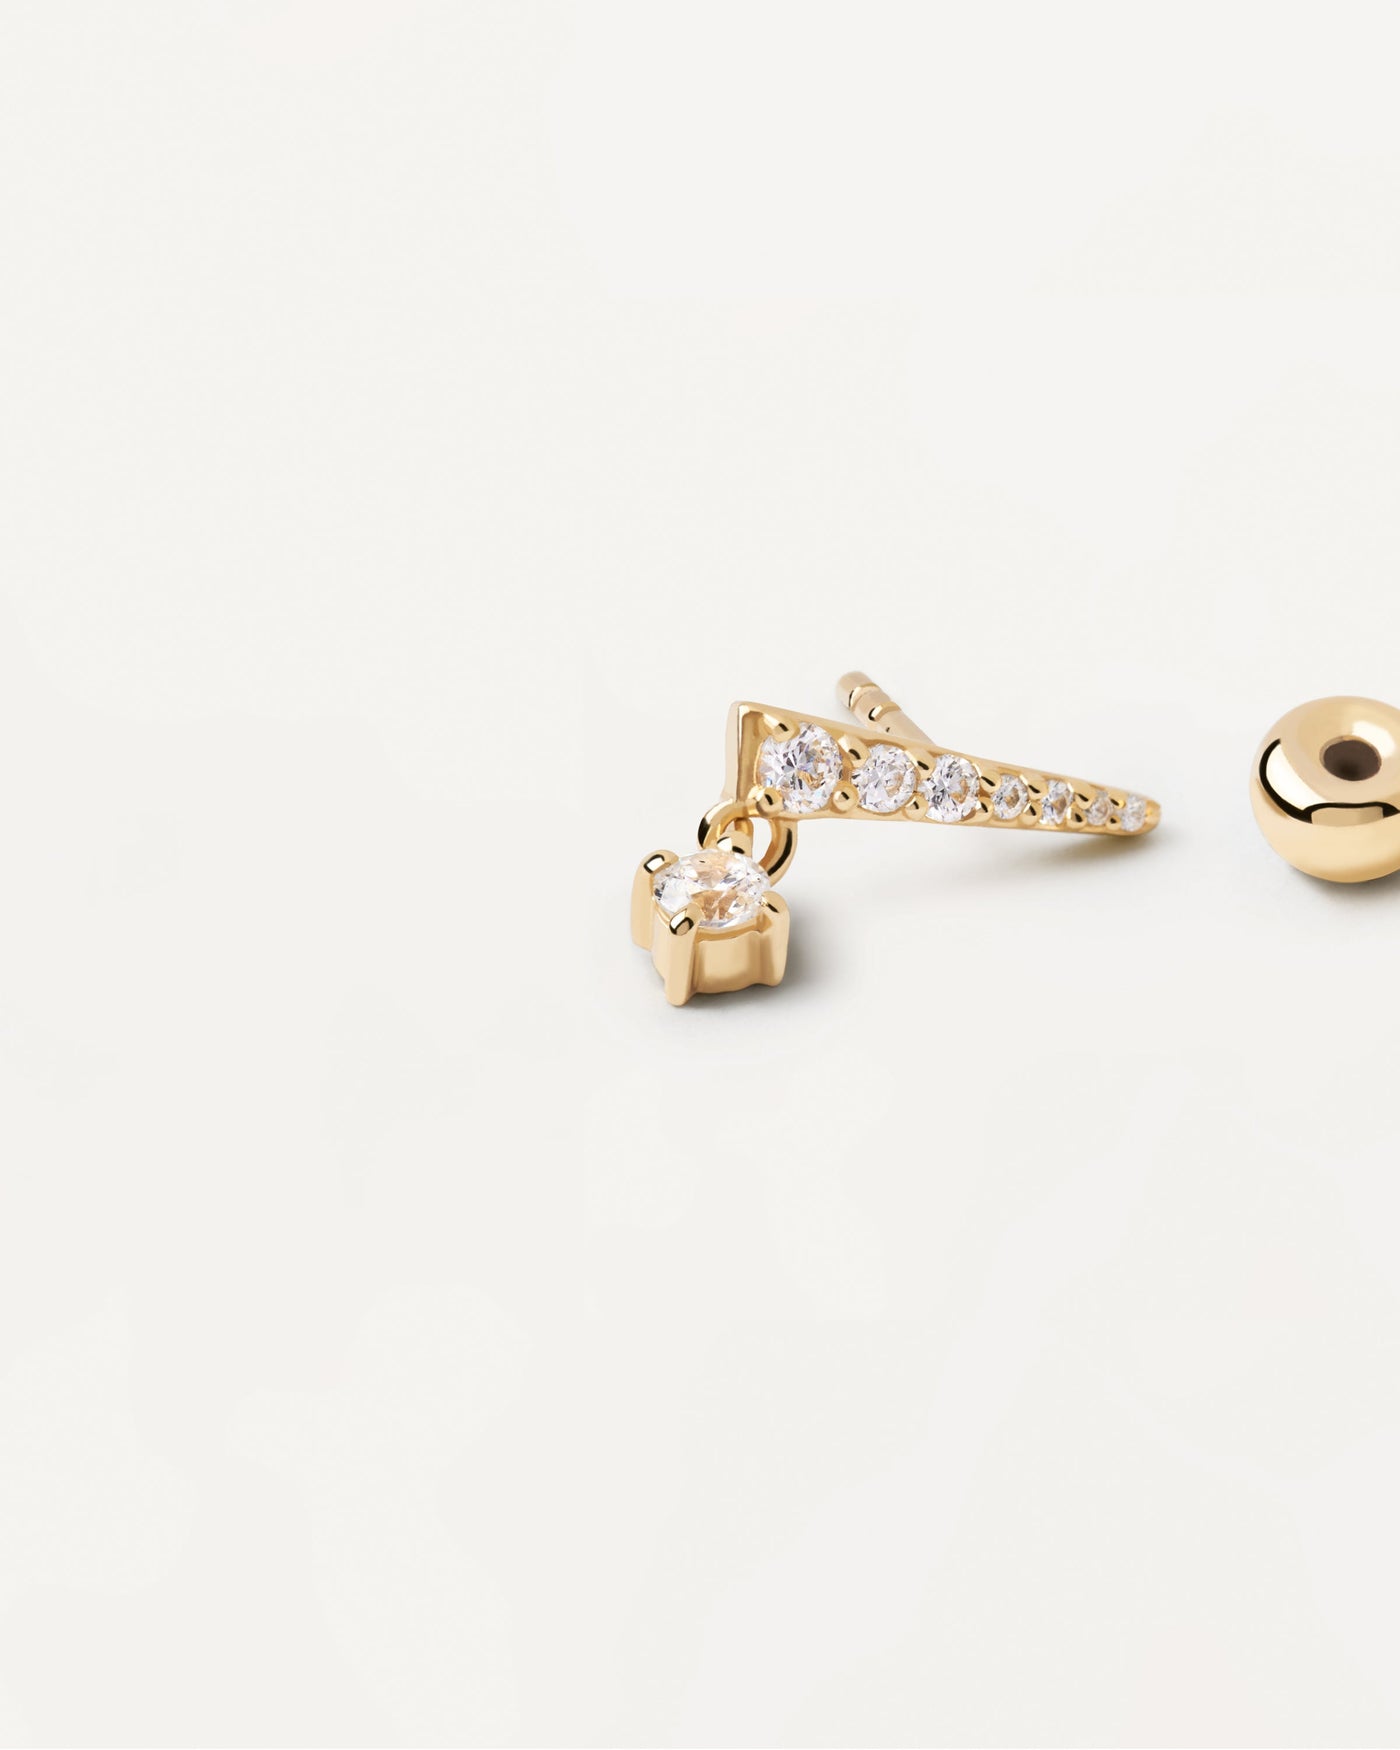 2023 Selection | Ava Single Earring. Gold-plated ear piercing in point shape with white zirconia. Get the latest arrival from PDPAOLA. Place your order safely and get this Best Seller. Free Shipping.